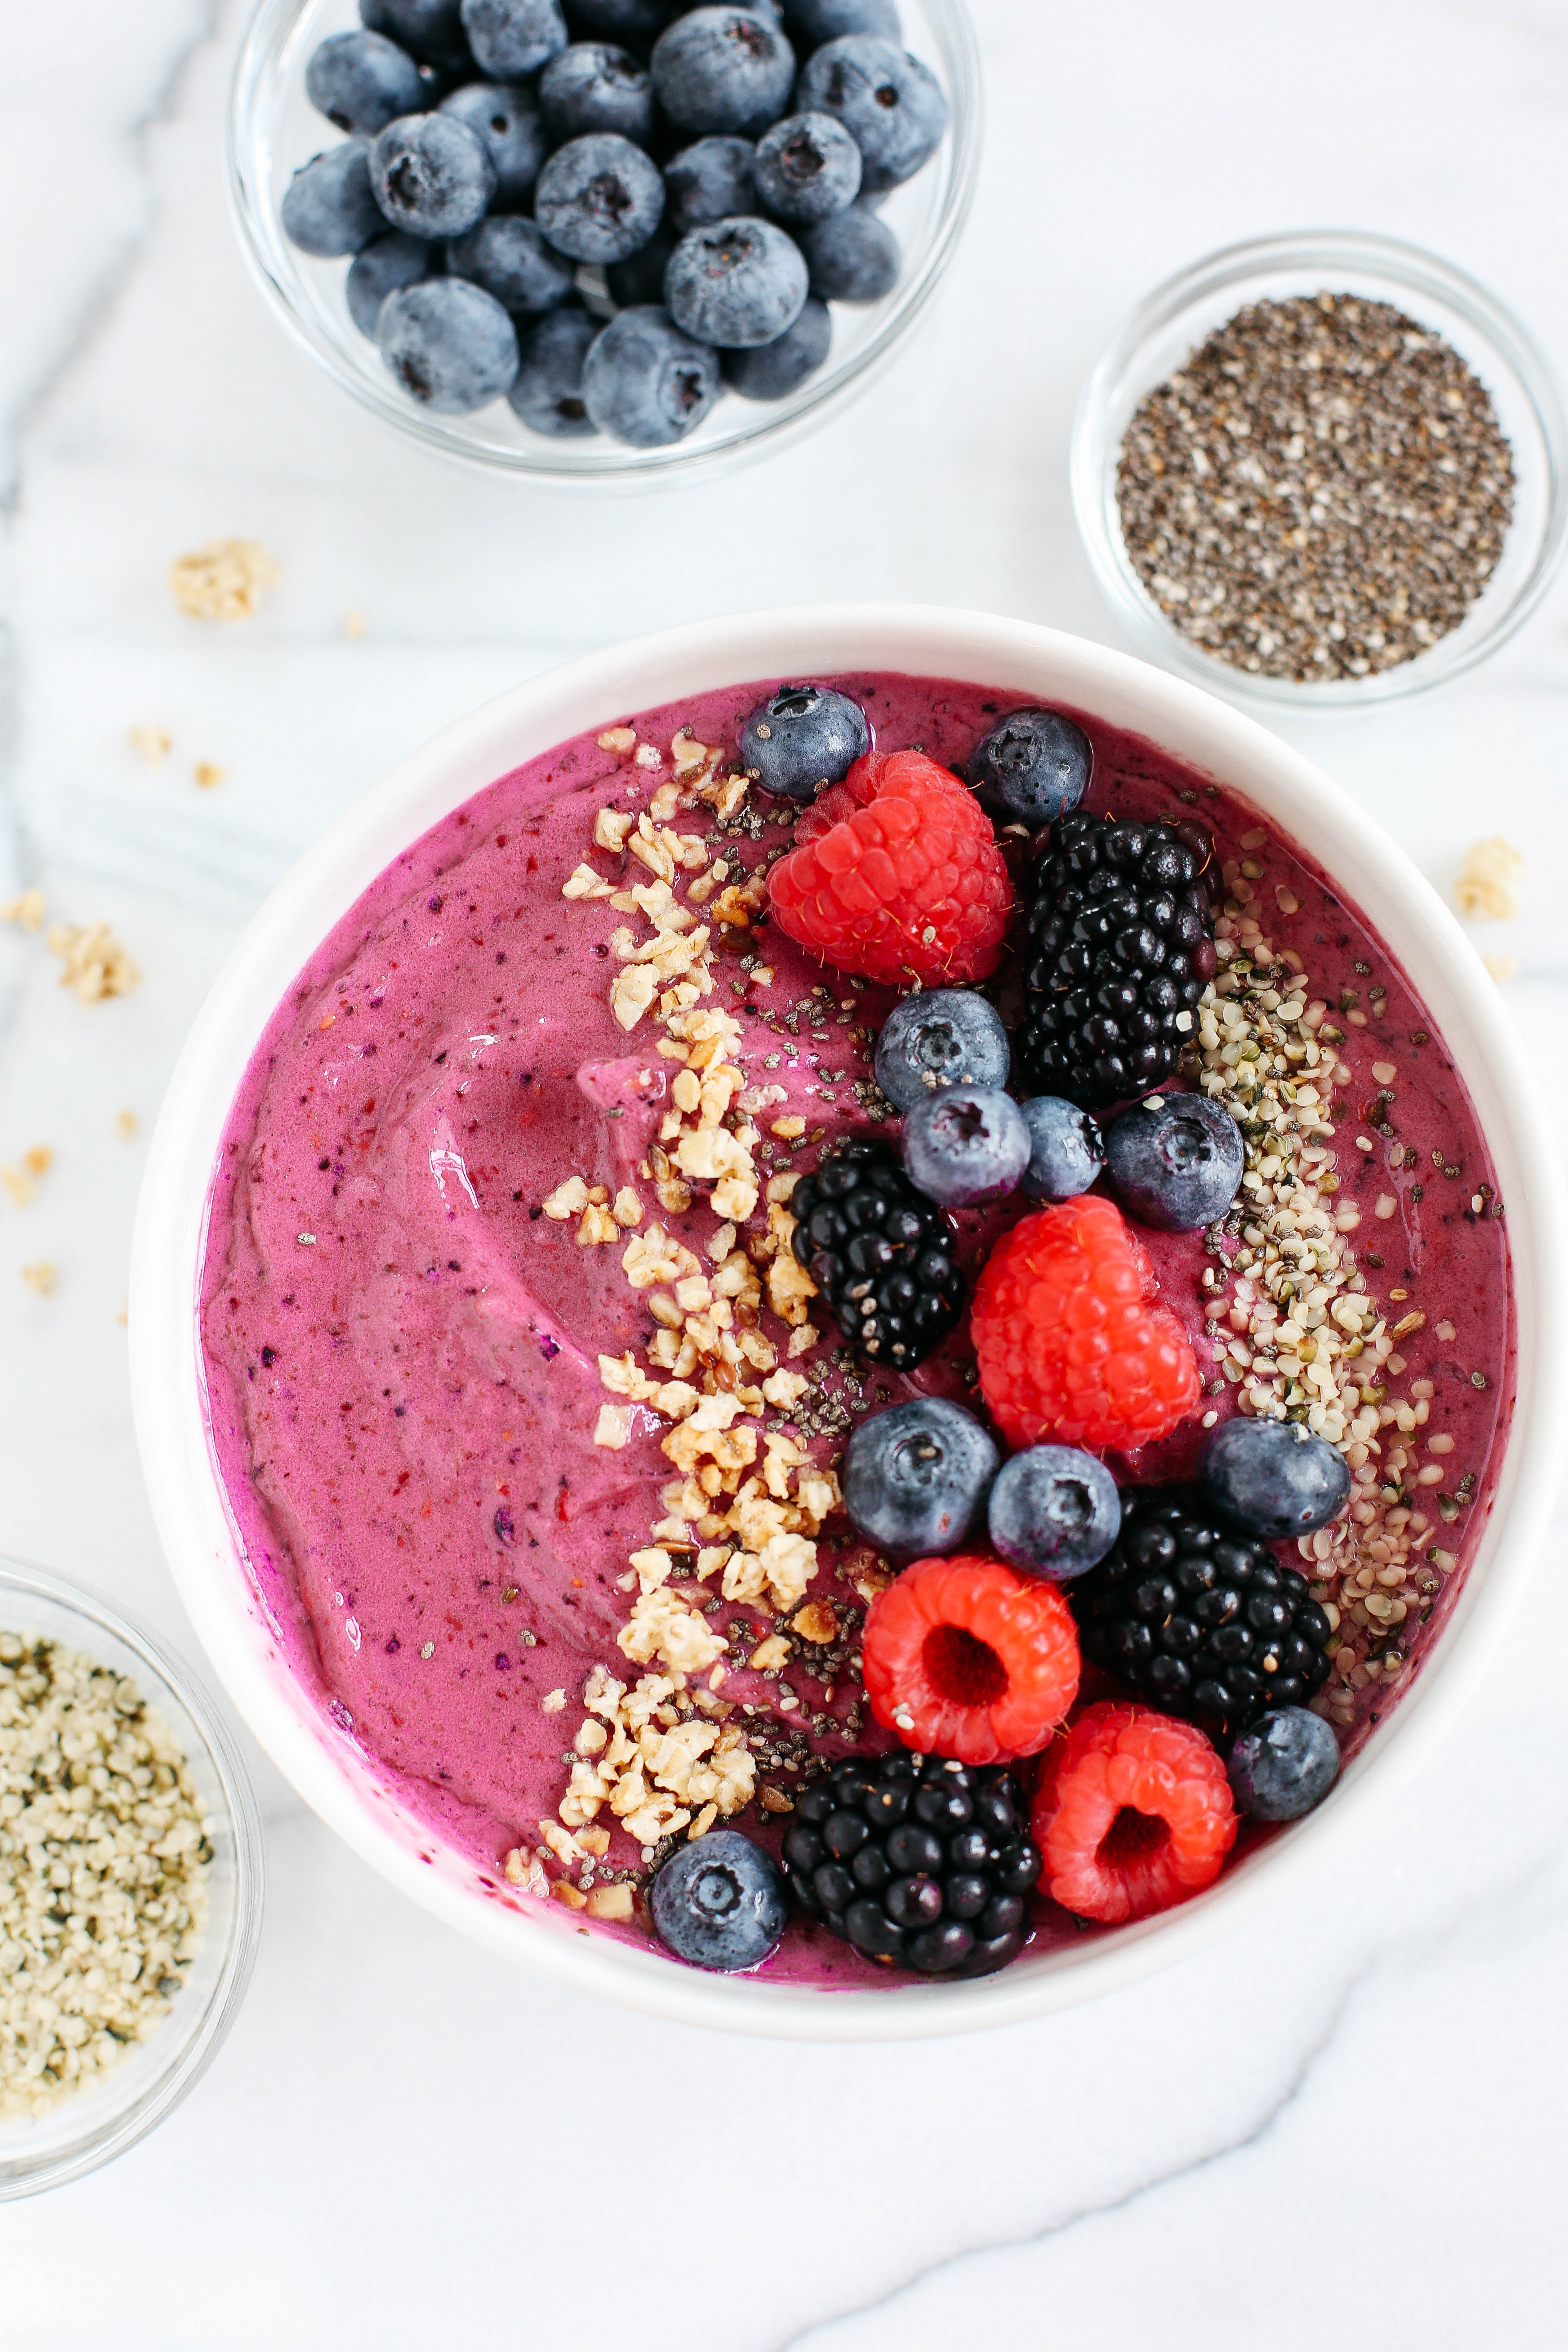 This Triple Berry Smoothie Bowl is creamy, delicious and super EASY to make with a variety of fun toppings and fresh fruit!